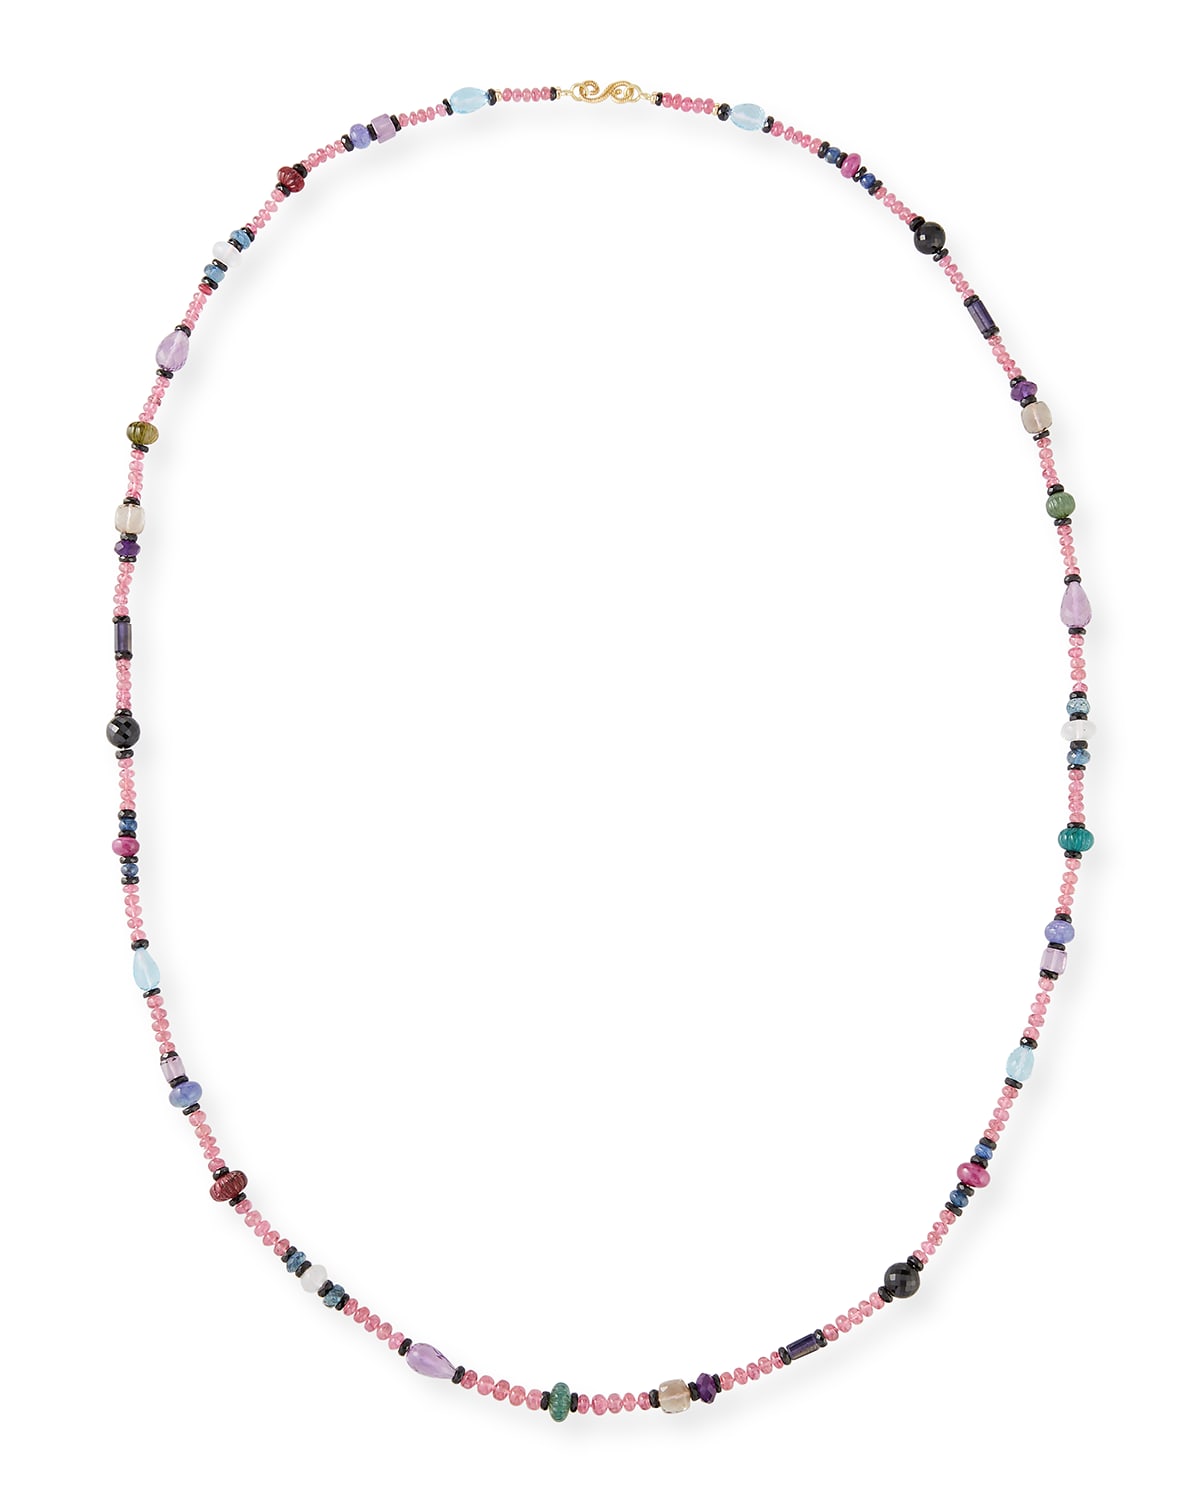 Long Pink Spinel Mixed-Stone Necklace, 36"L